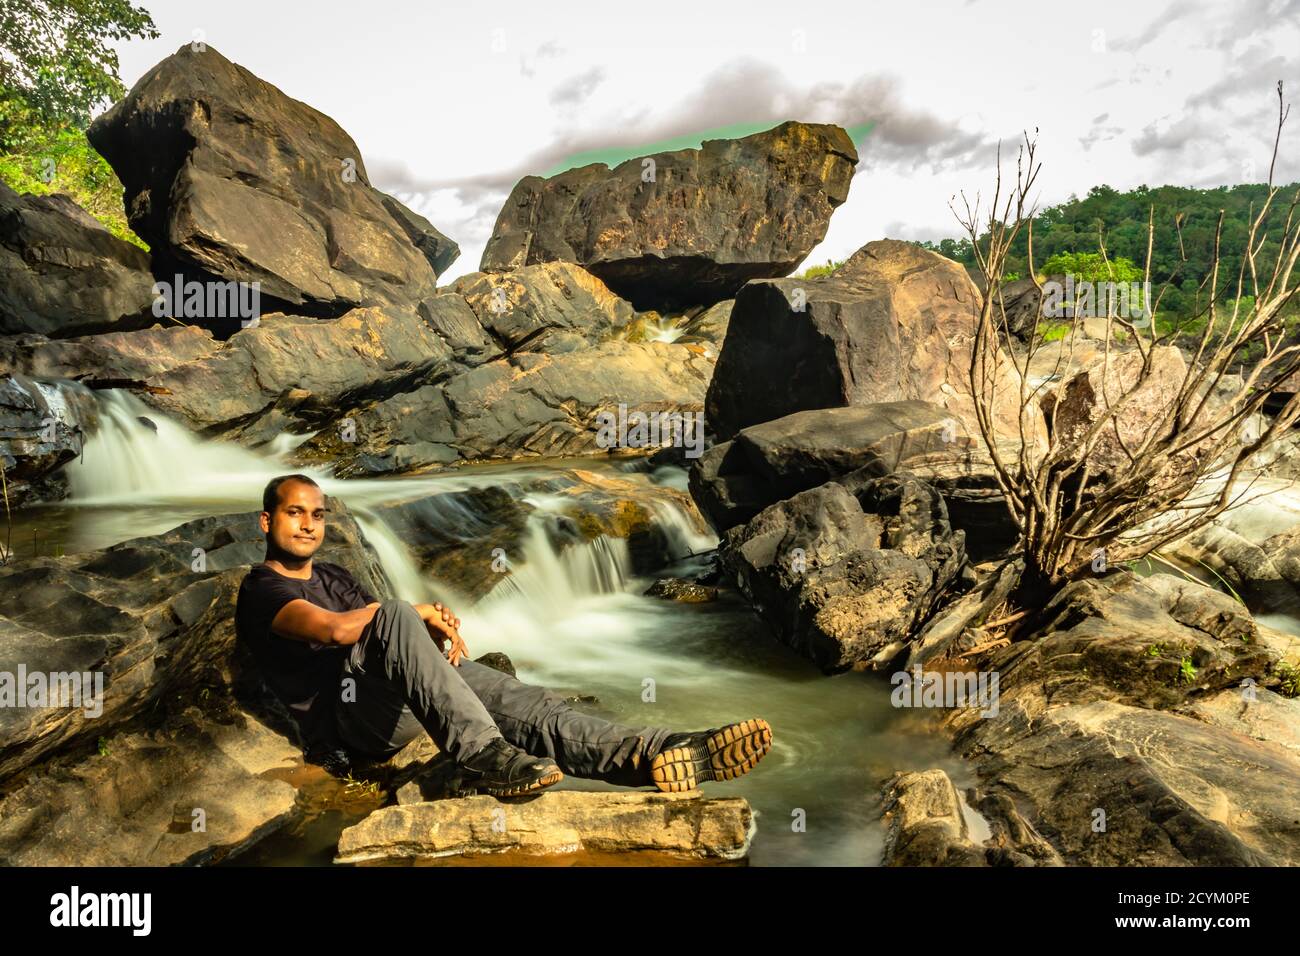 man relaxing at rock with the beautiful waterfall stream long exposure shot at evening image is taken at remote western ghat forests karnataka india. Stock Photo